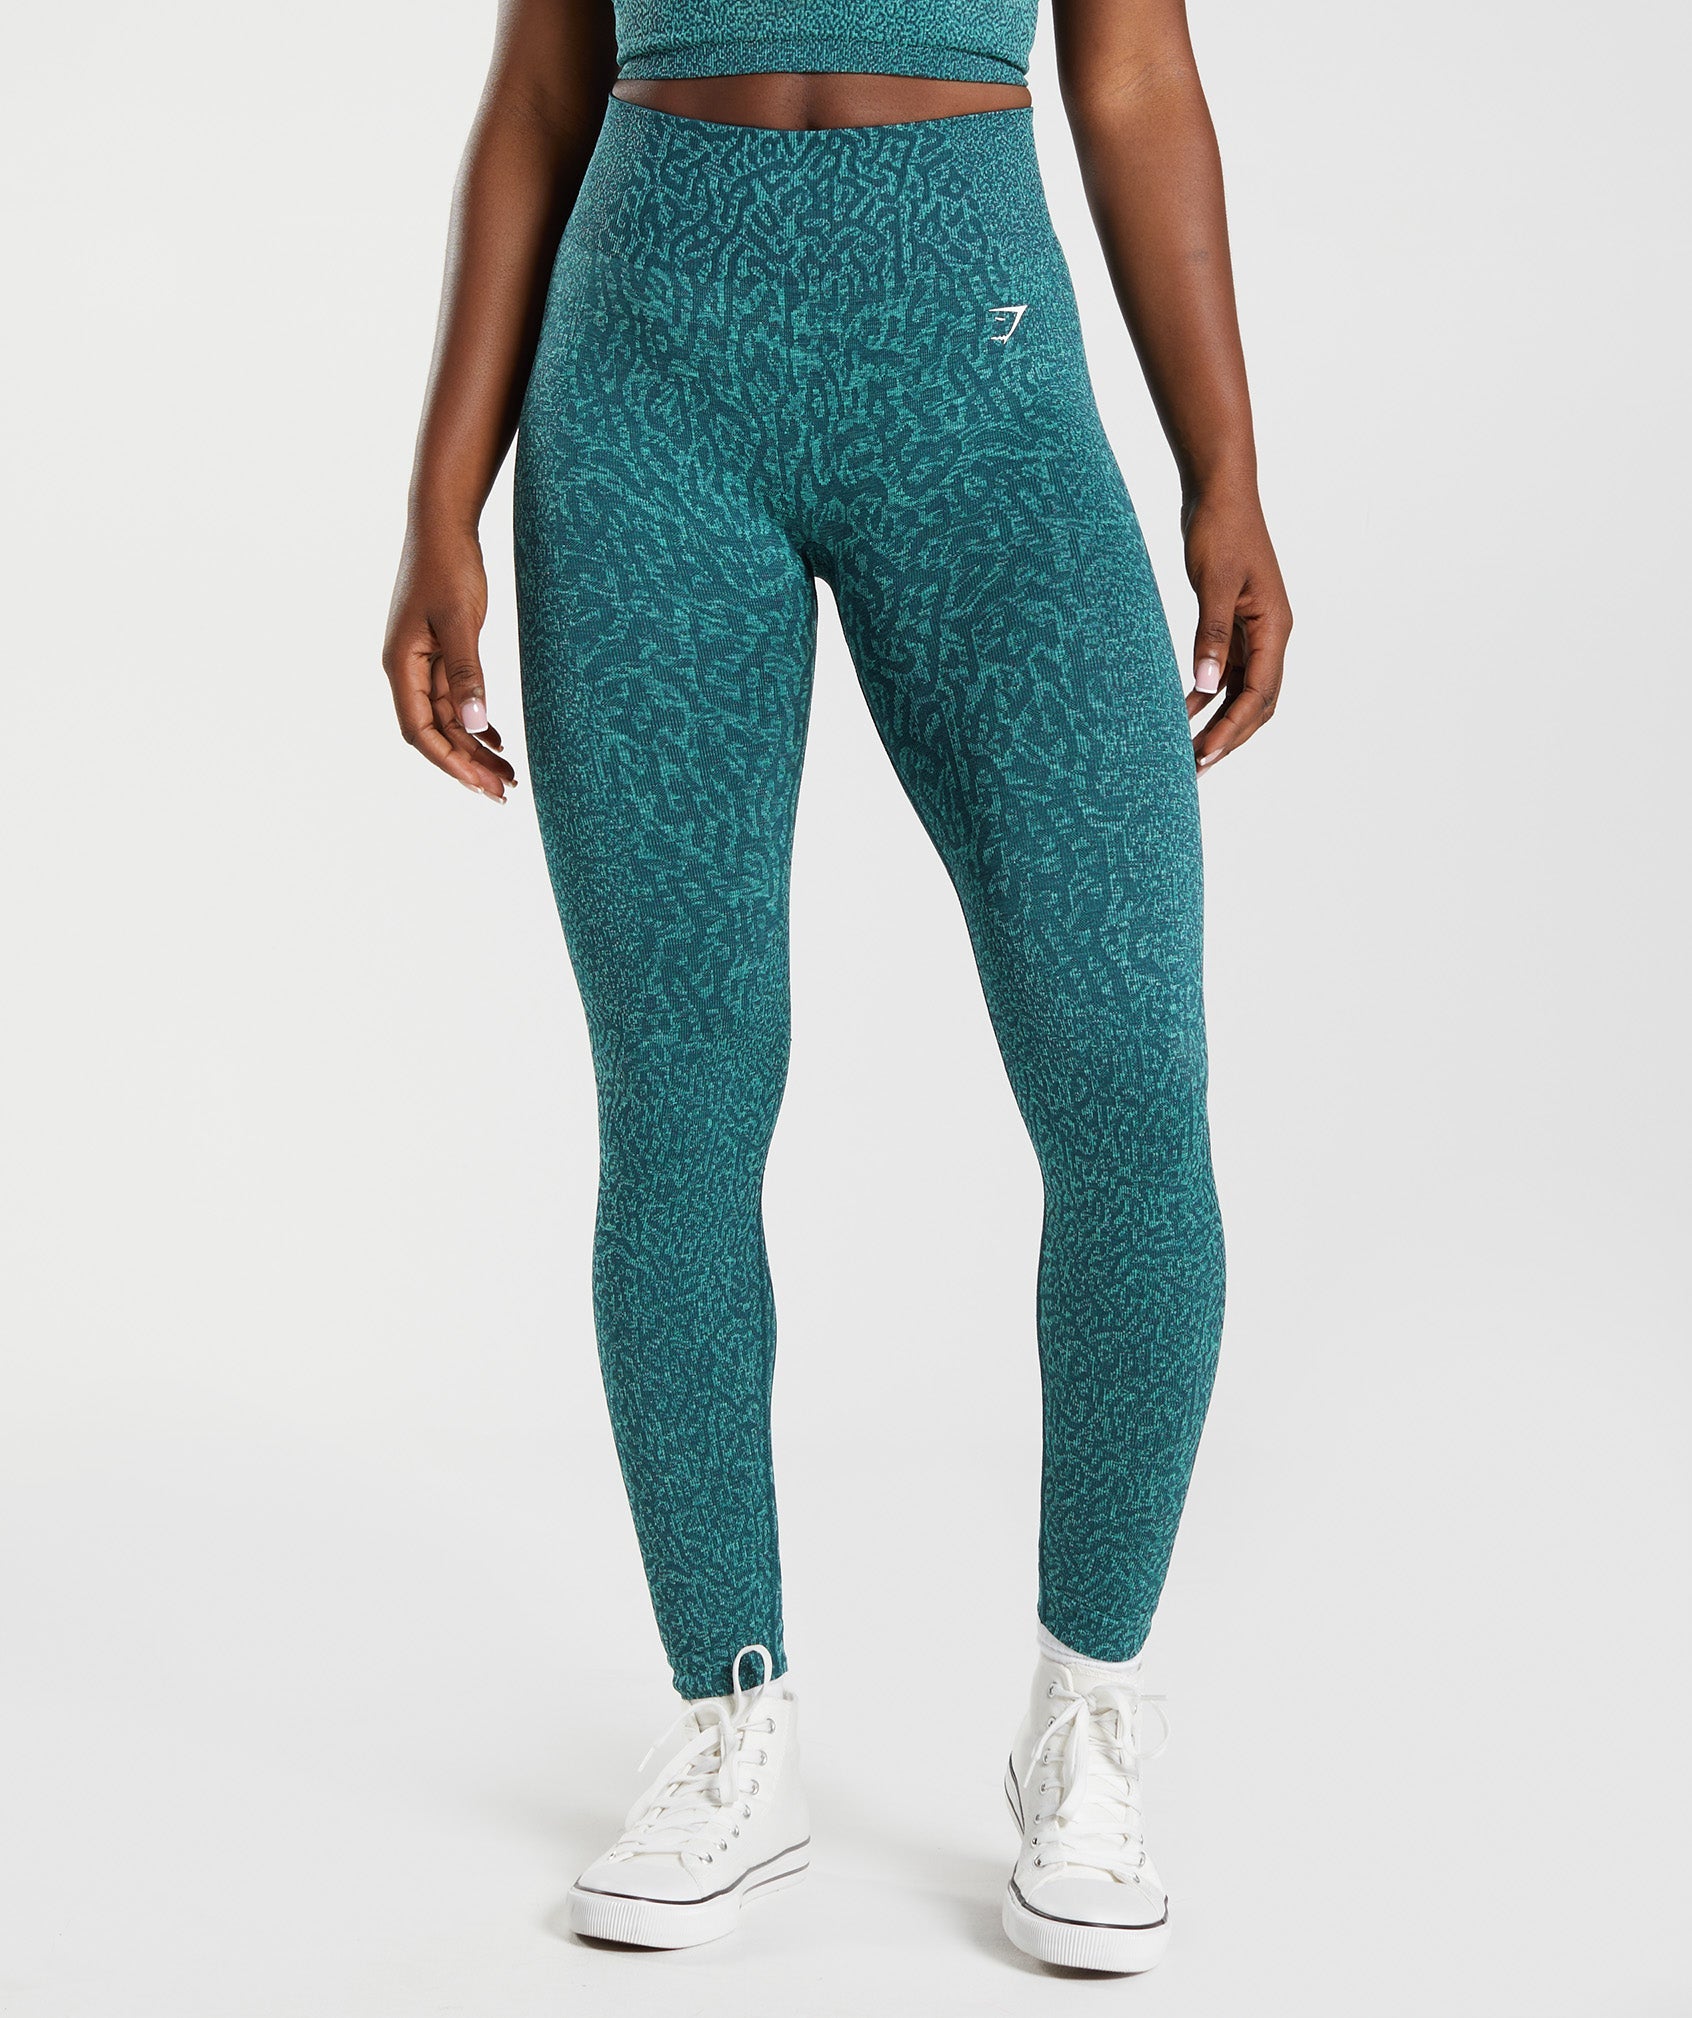 GYMSHARK ADAPT OMBRE SEAMLESS LEGGINGS IN LIGHT BLUE IN EXTRA SMALL